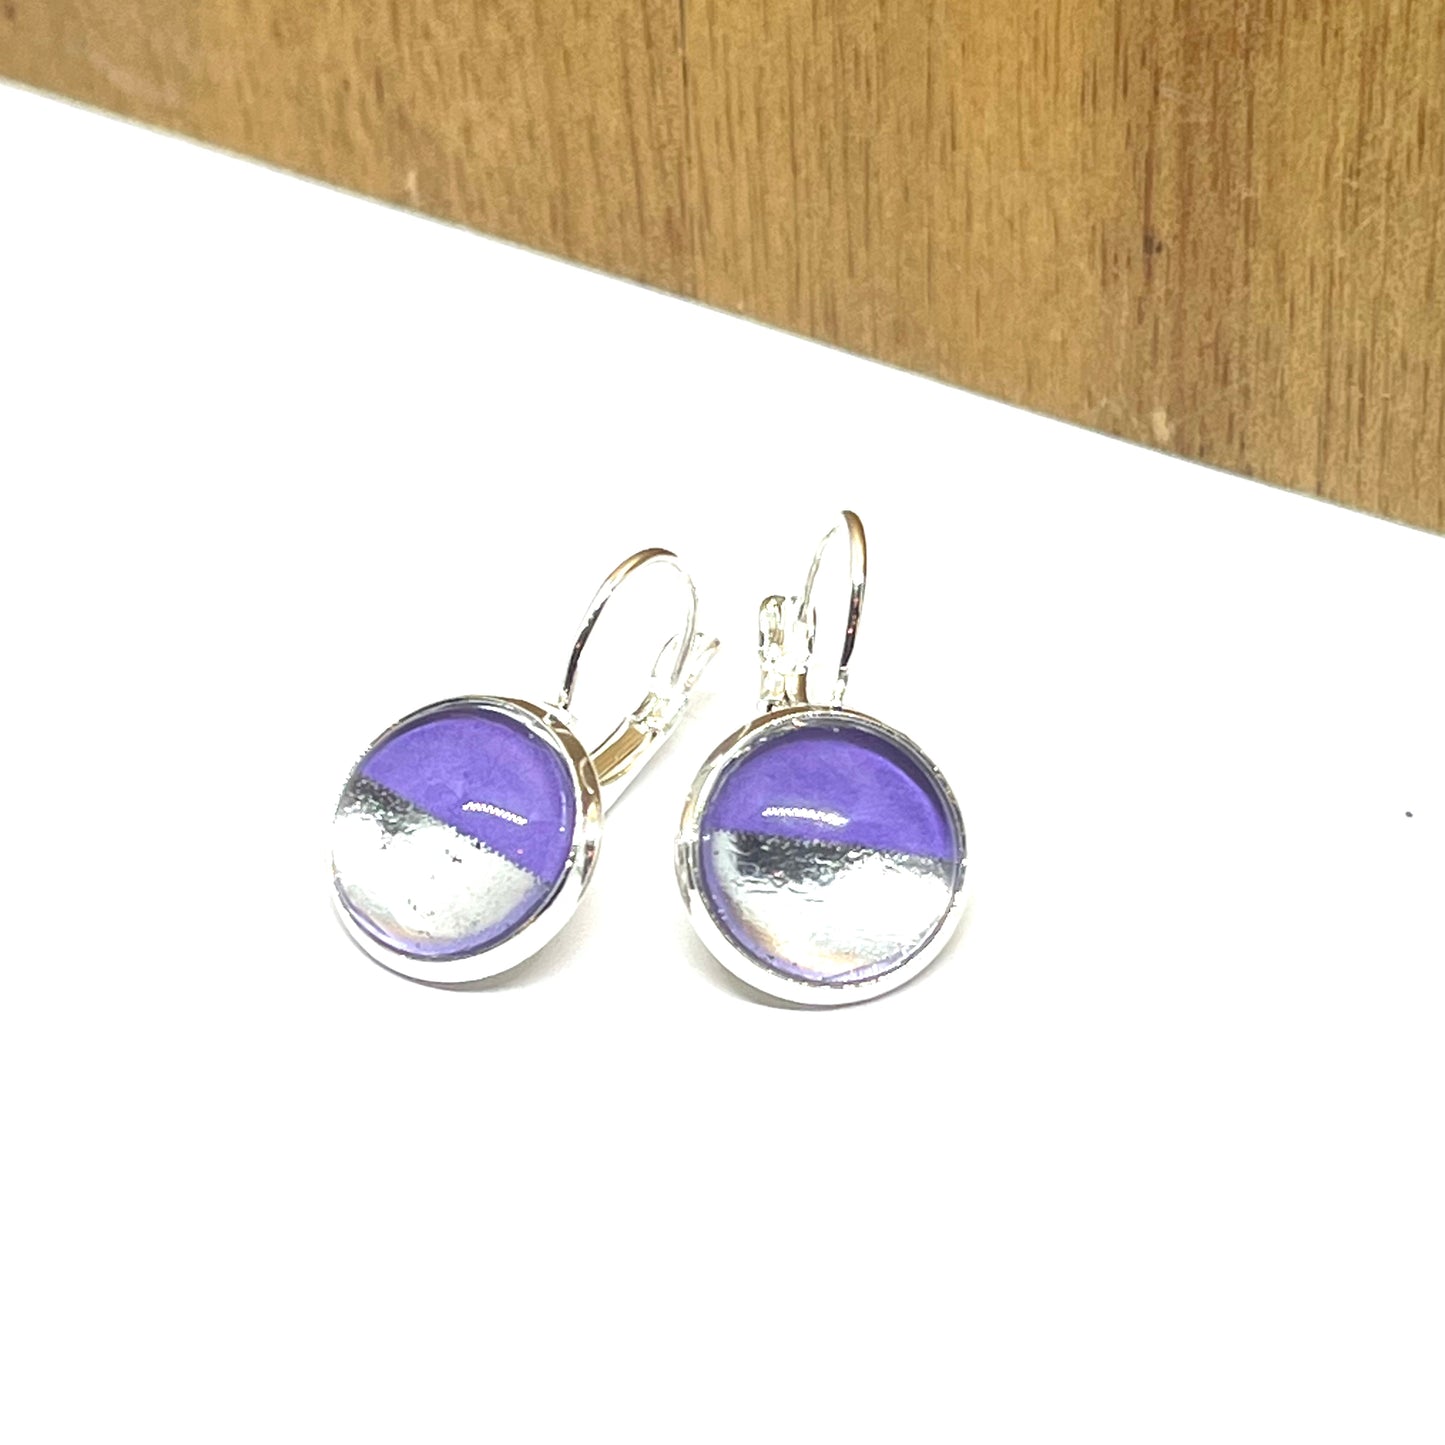 Silver dipped on purple glass dome earrings